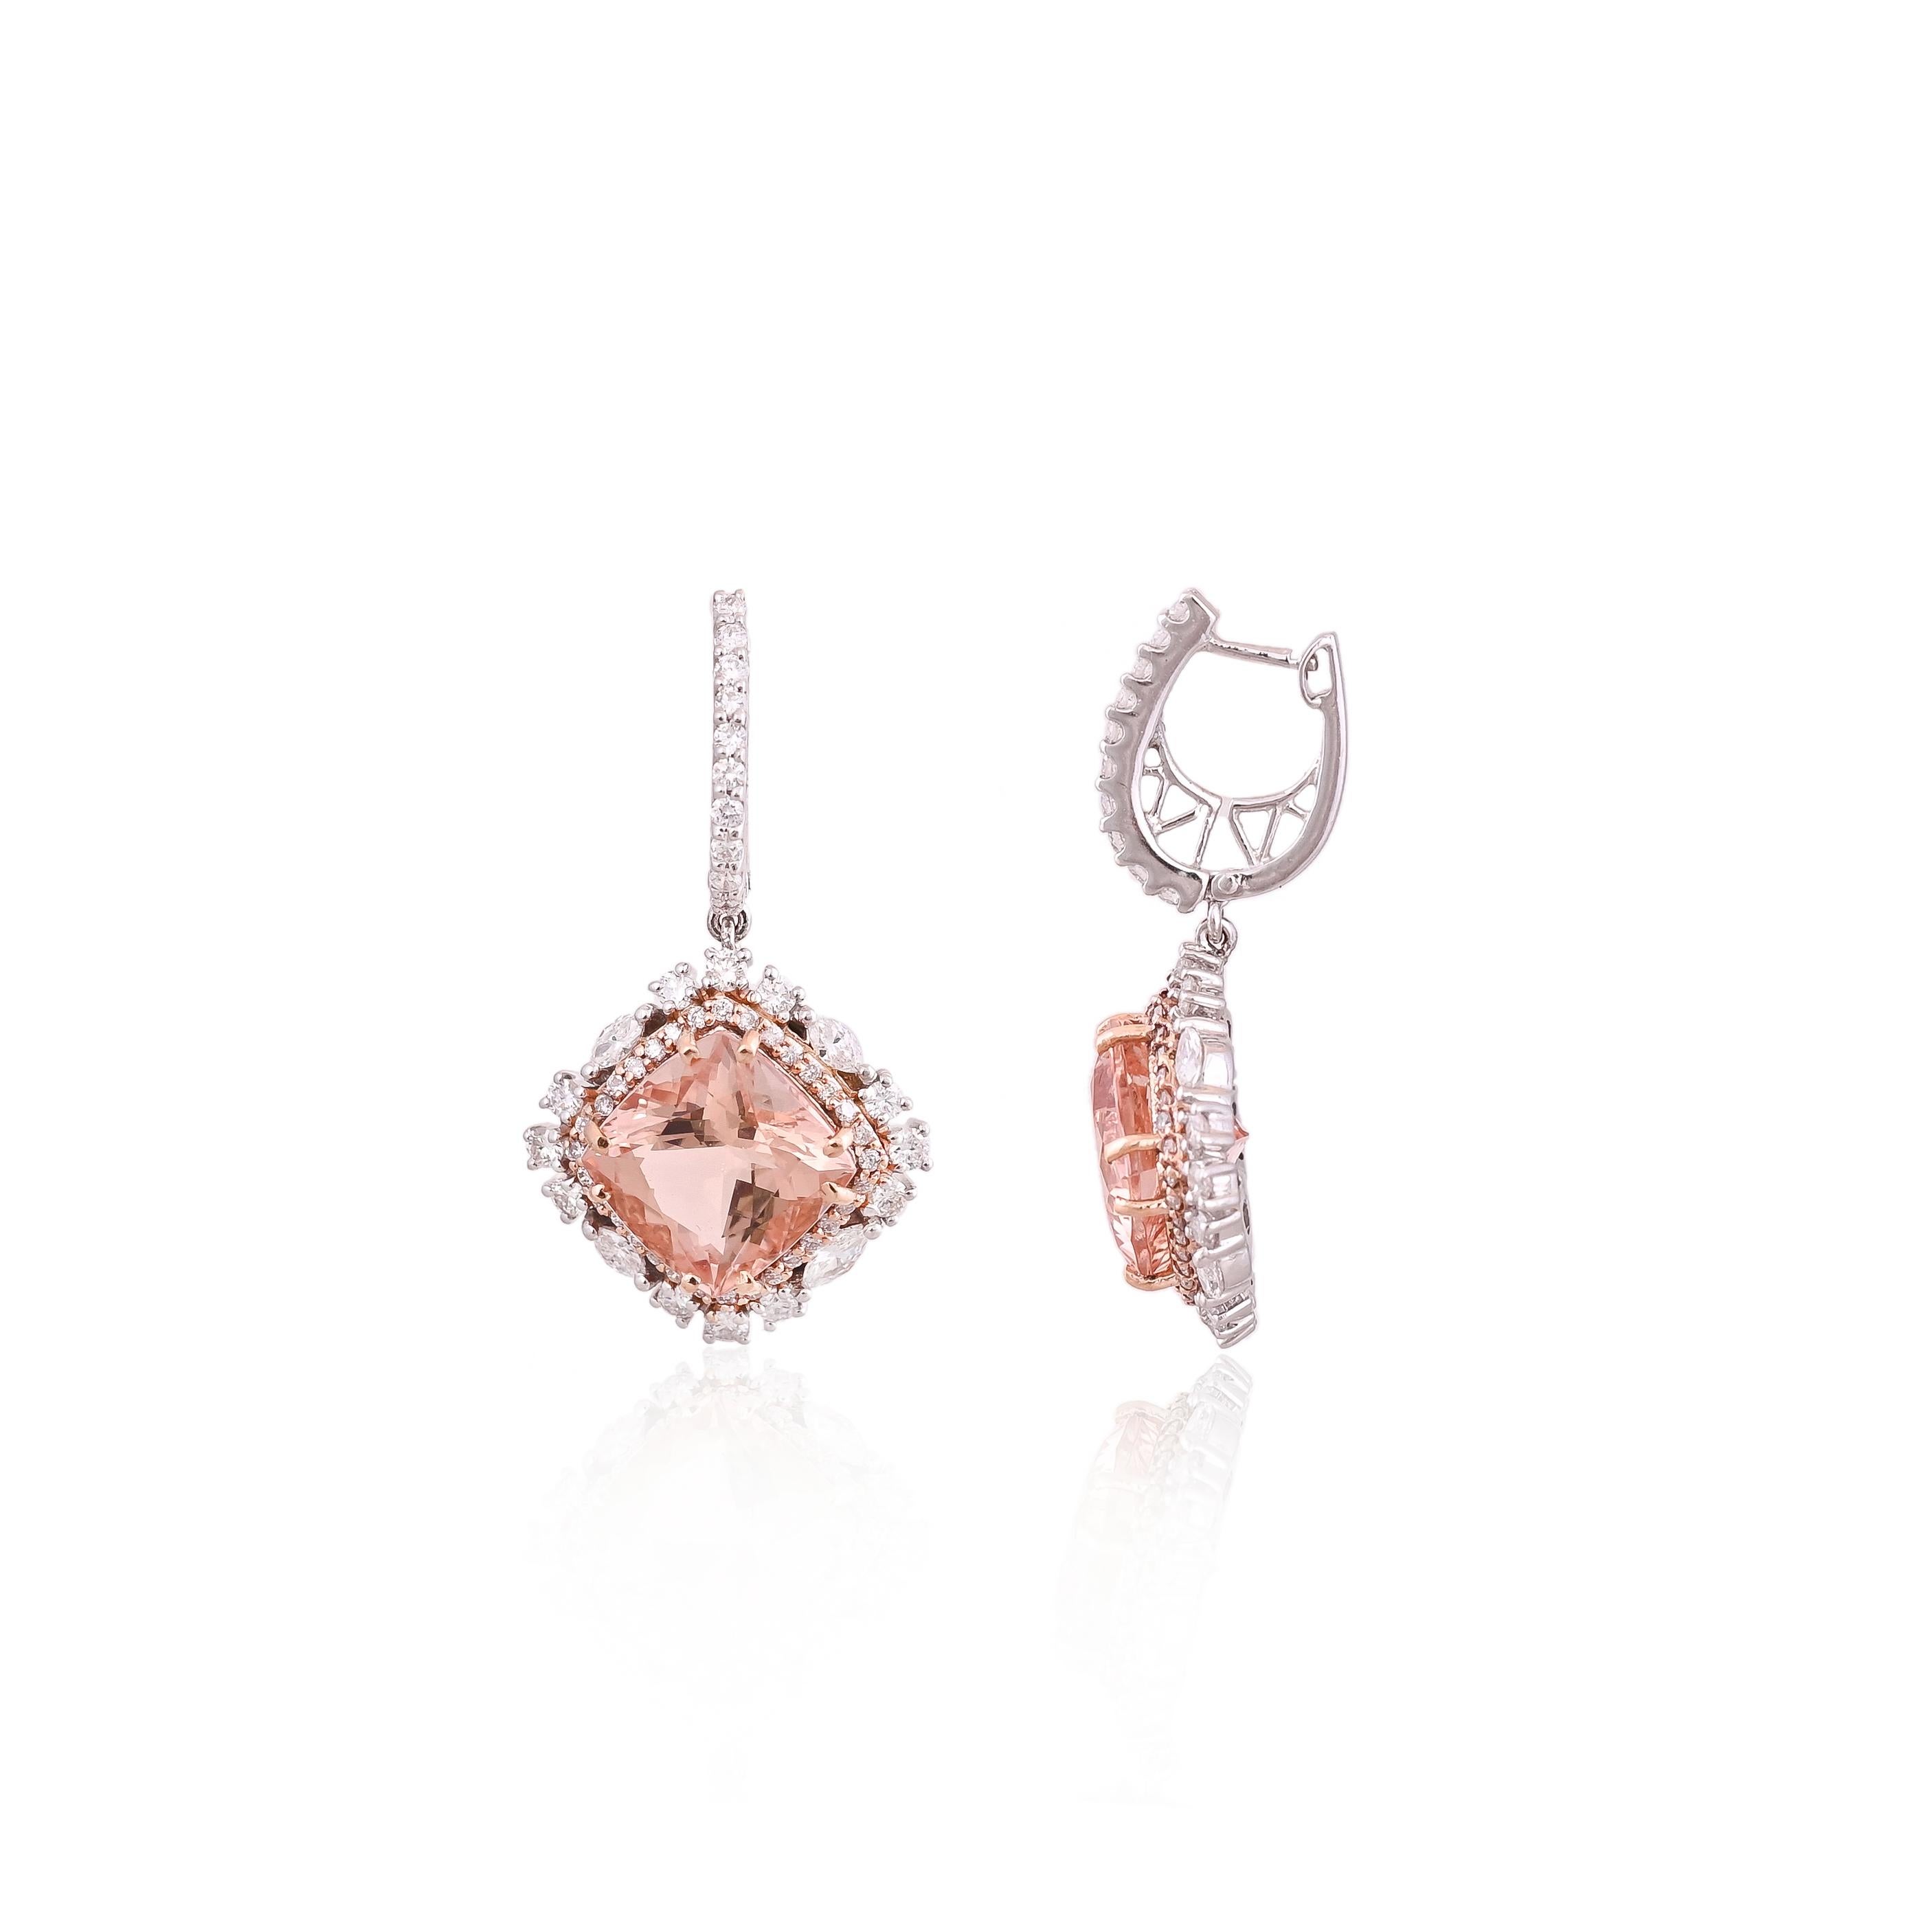 A very beautiful and special, Morganite Dangle Earrings set in 18K Rose Gold & Diamonds. The weight of the cushion shaped Morganites is 11.59 carats. The weight of the Diamonds is 2.04 carats. Net Gold weight is 10.31 grams. The dimensions of the